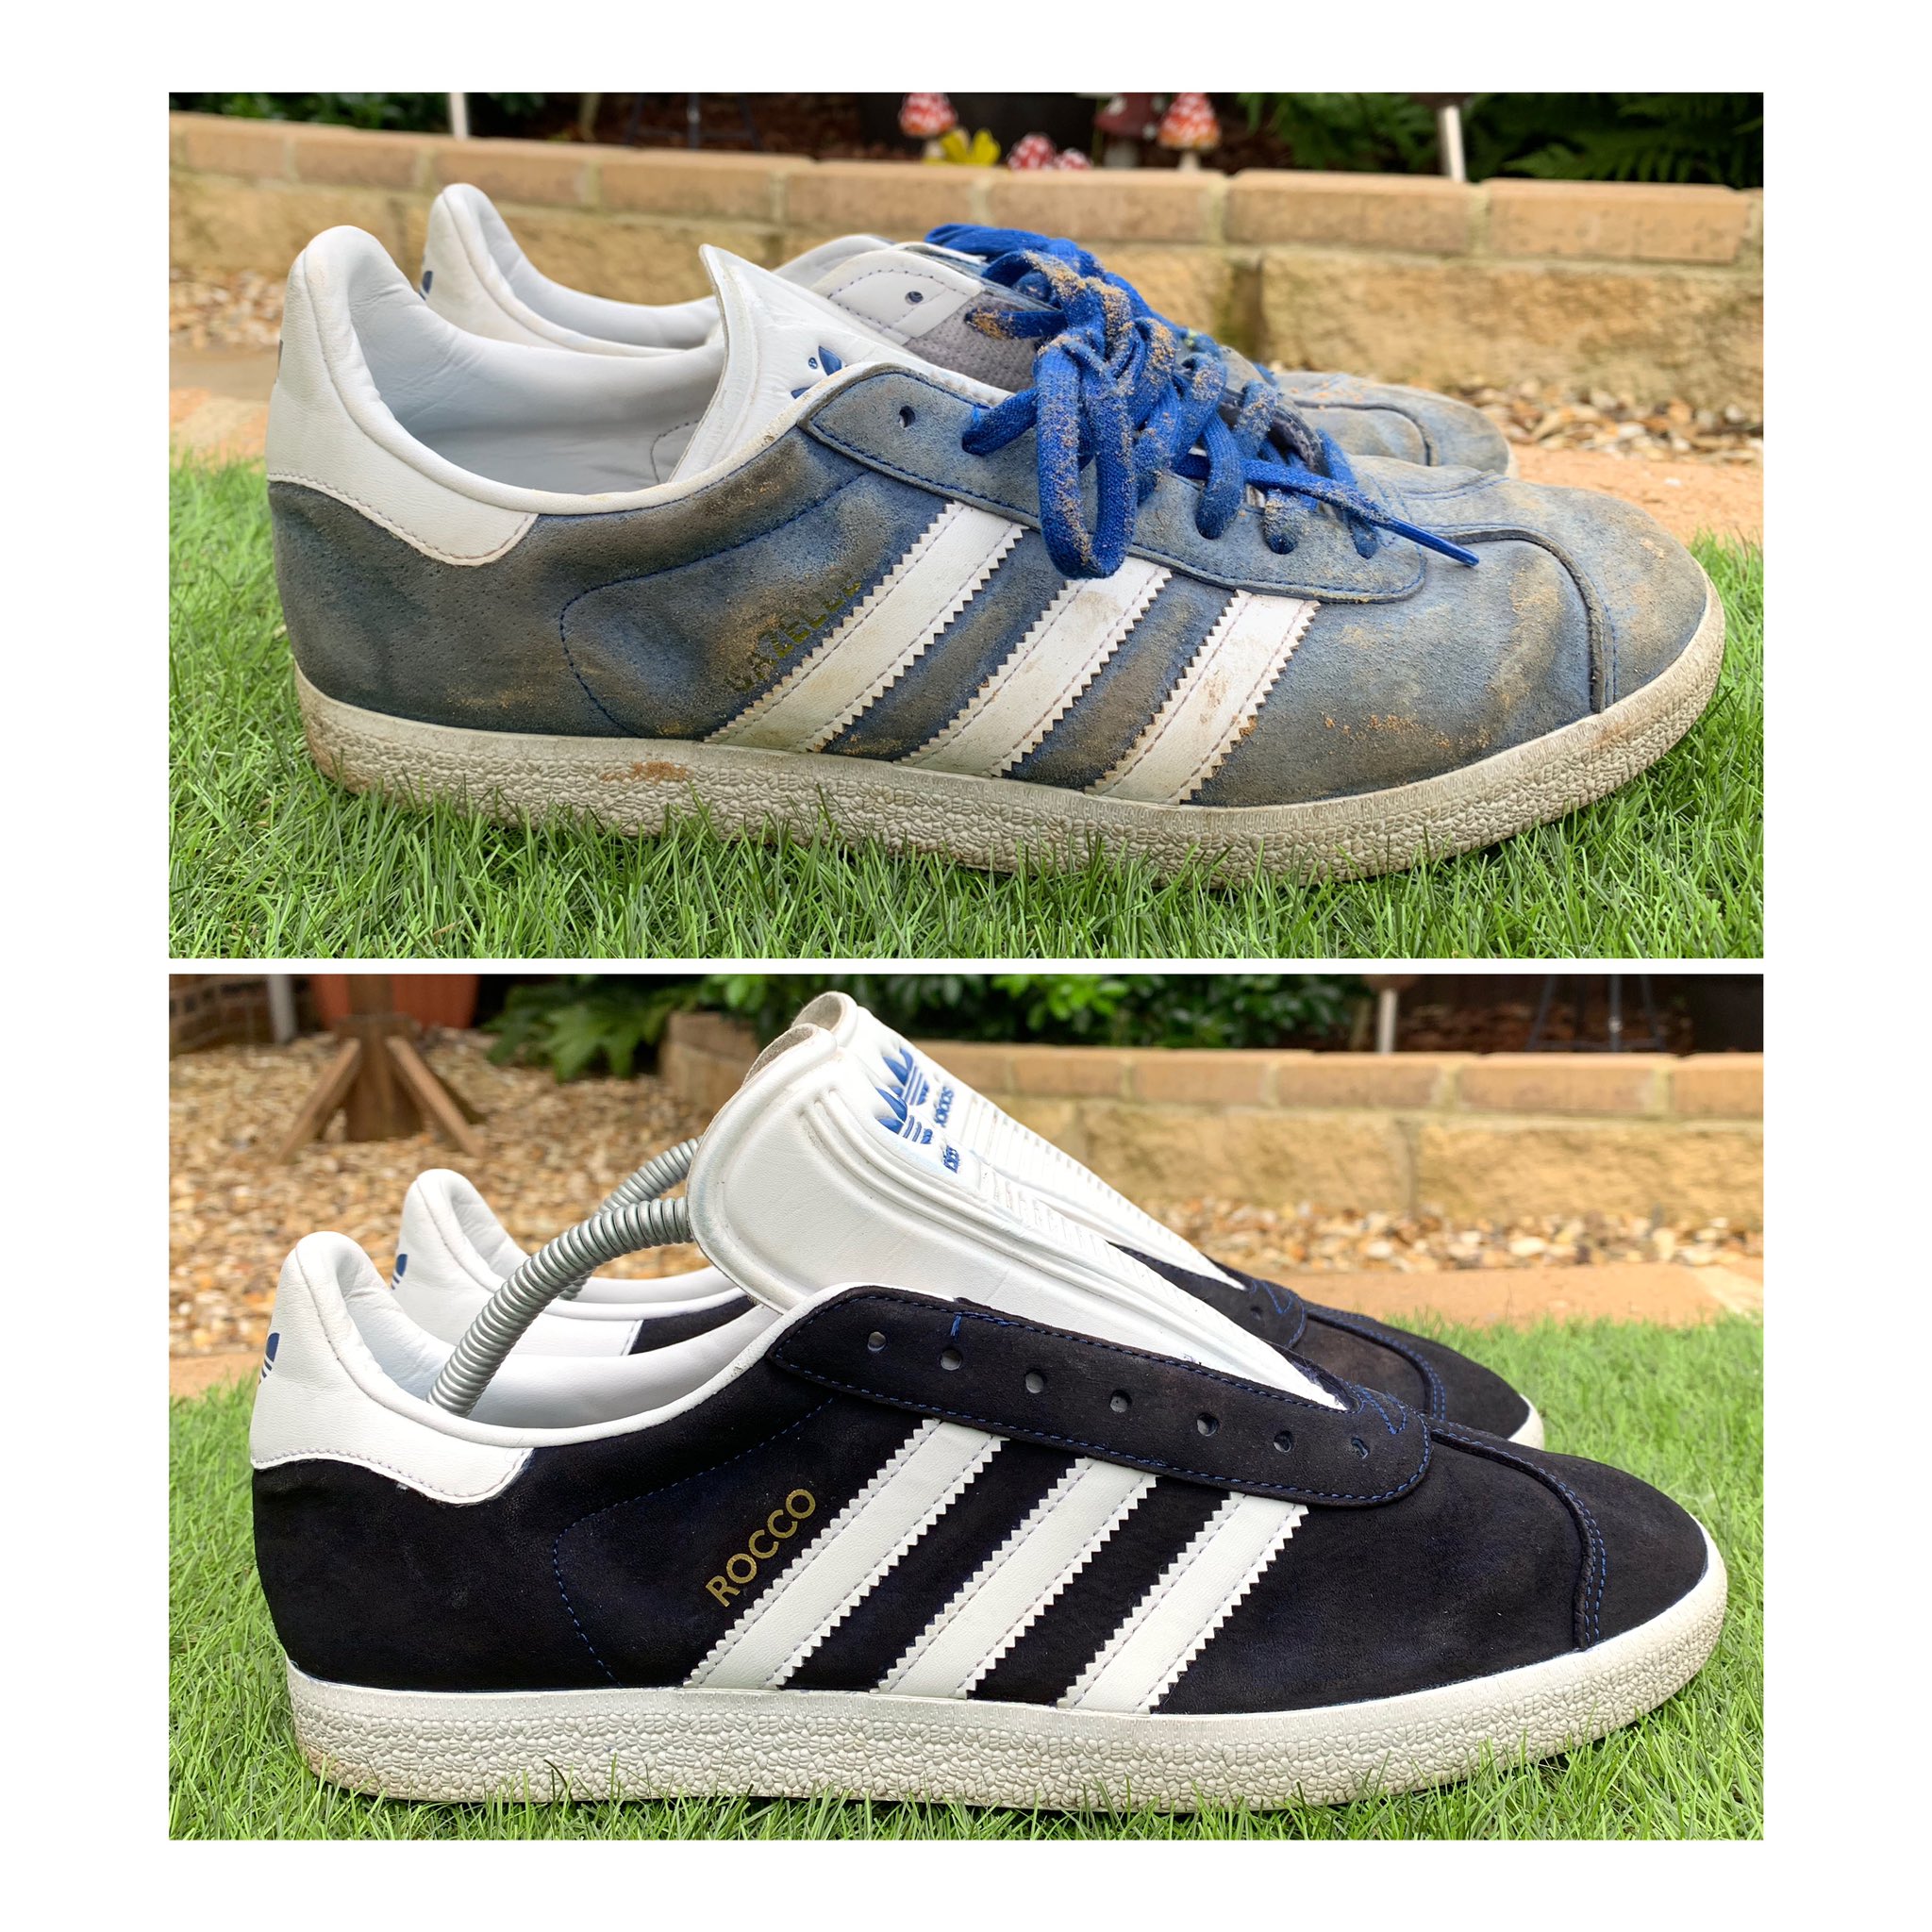 Adikoggz Trainer Customisation X: "Adidas Gazelles custom 😮 BEFORE + AFTER Deep clean, re dye, re lettering to a personal touch. #adidas #adiporn #3stripes #restoration #custom #work #size #gazelle #